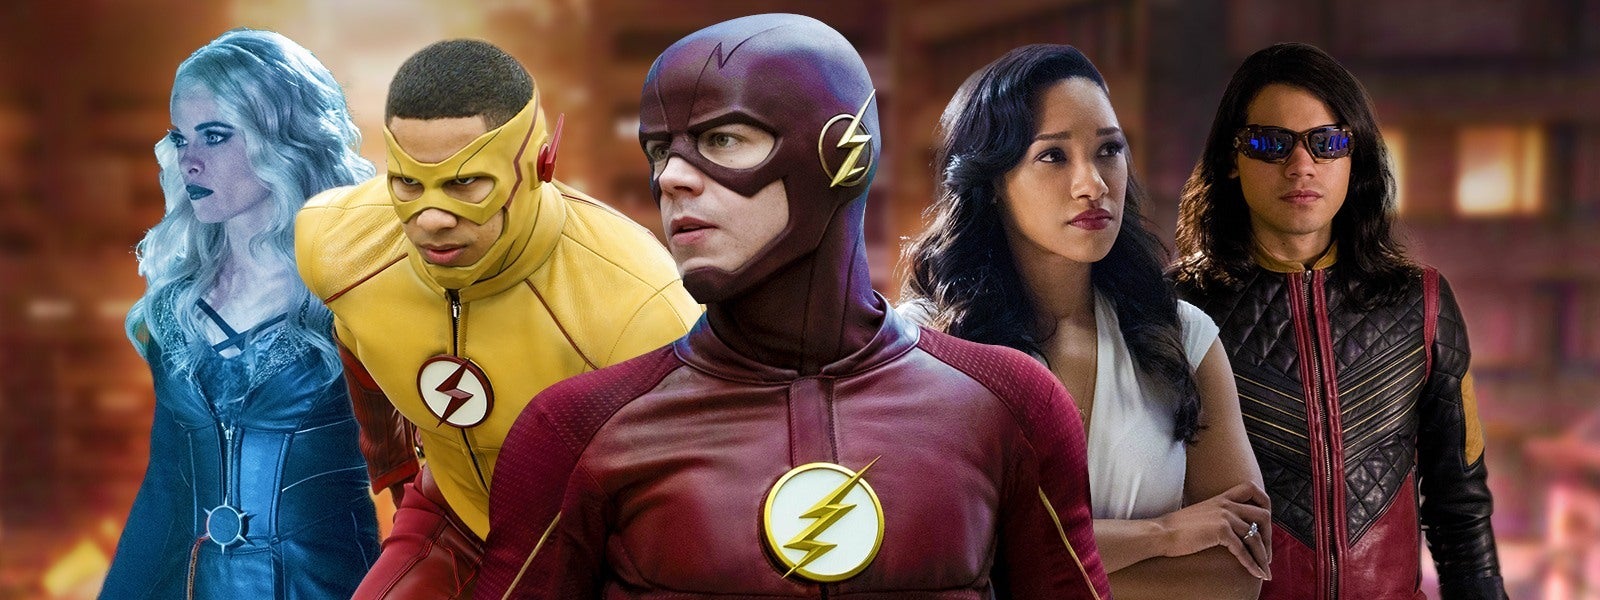 When Does Flash Season 3 Come Out On Netflix